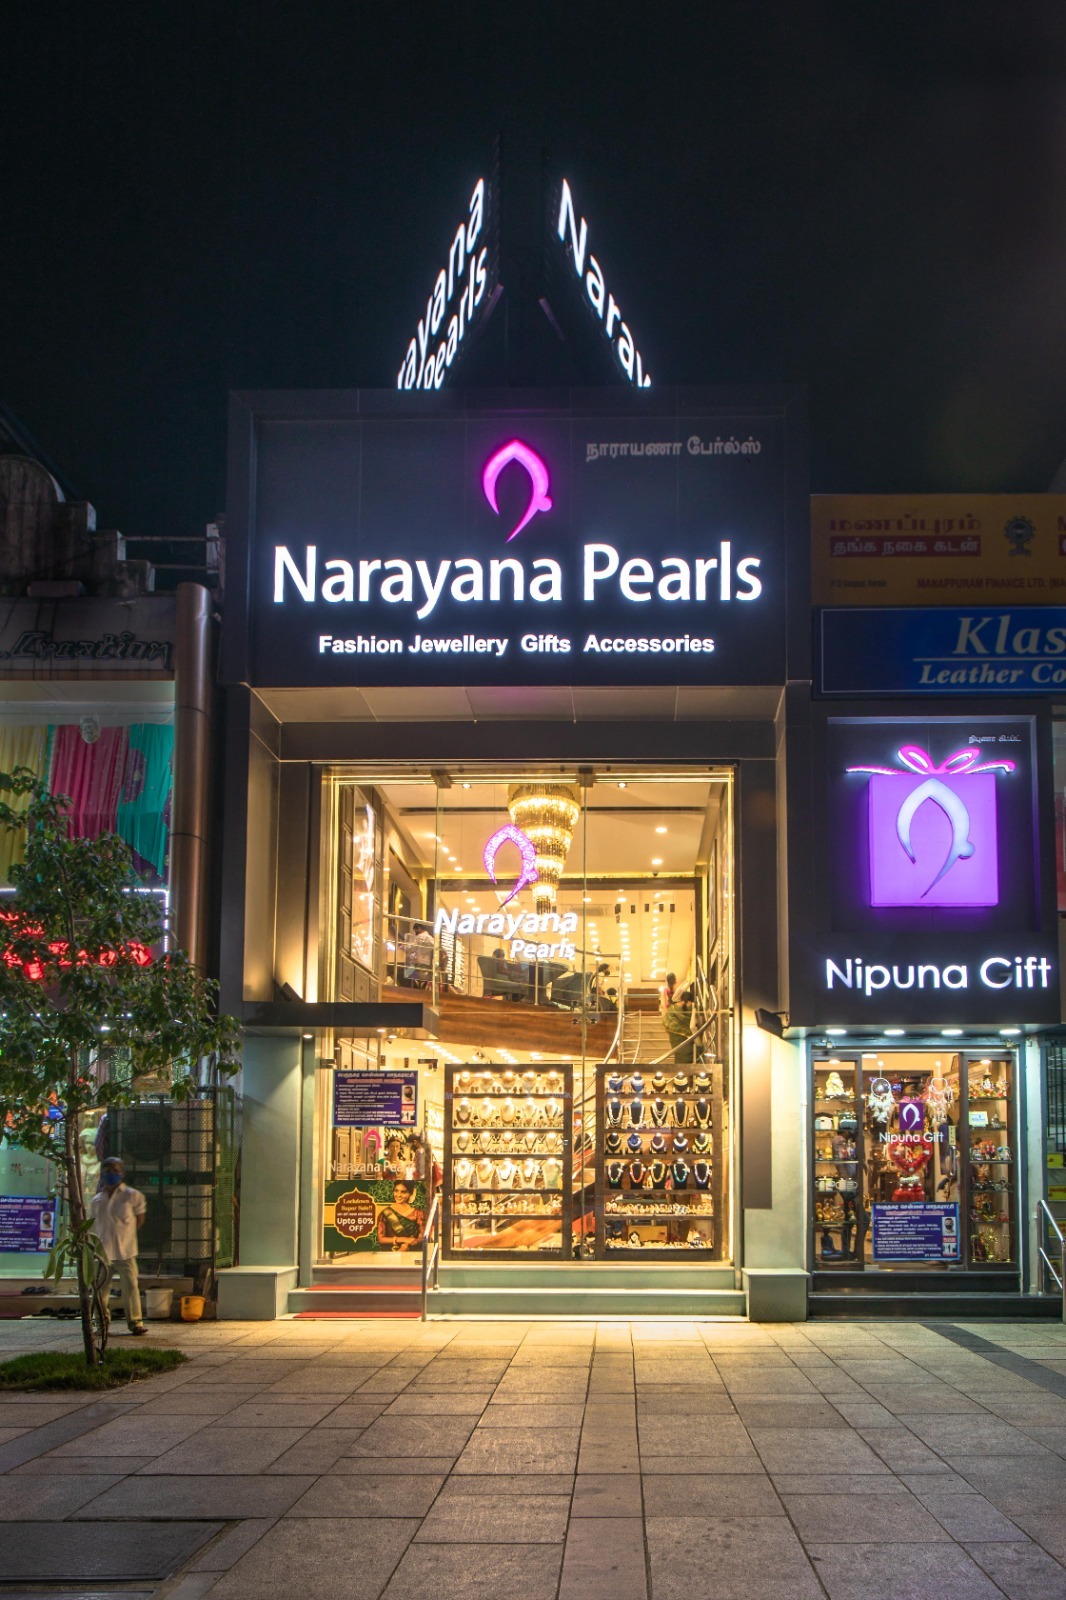 Narayana Pearls: A Legacy of Craftsmanship and Tradition Spanning Over 30 Glorious Years.